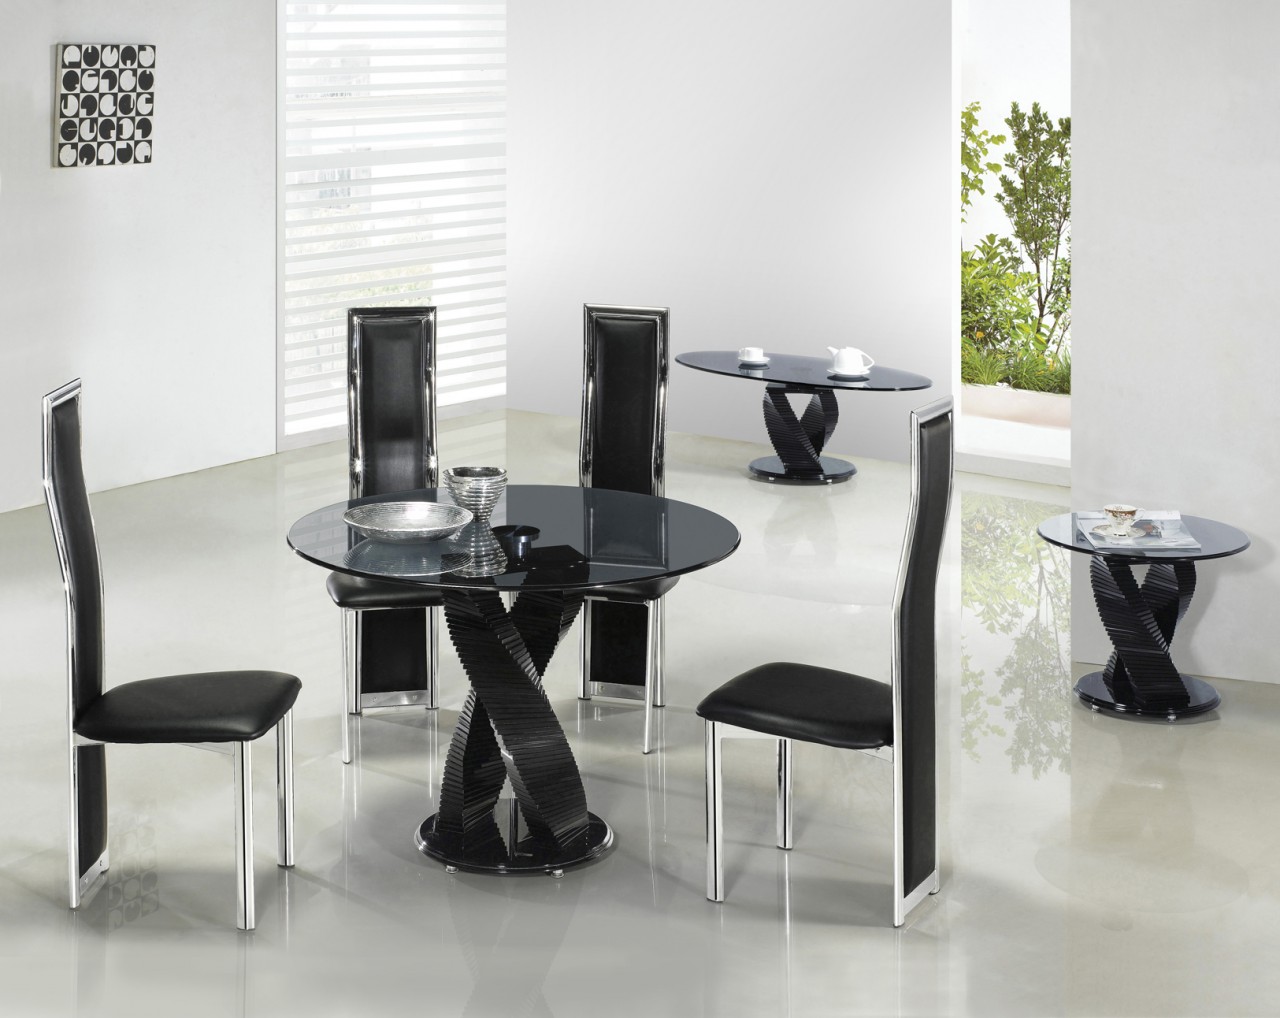 White Dining Applying Dazzling White Dining Room Color Applying Black Furniture With Black Sleek Round Dining Room Tables In Spiral Pedestal Design And Furnished With Chairs Dining Room Perfect Round Dining Room Tables